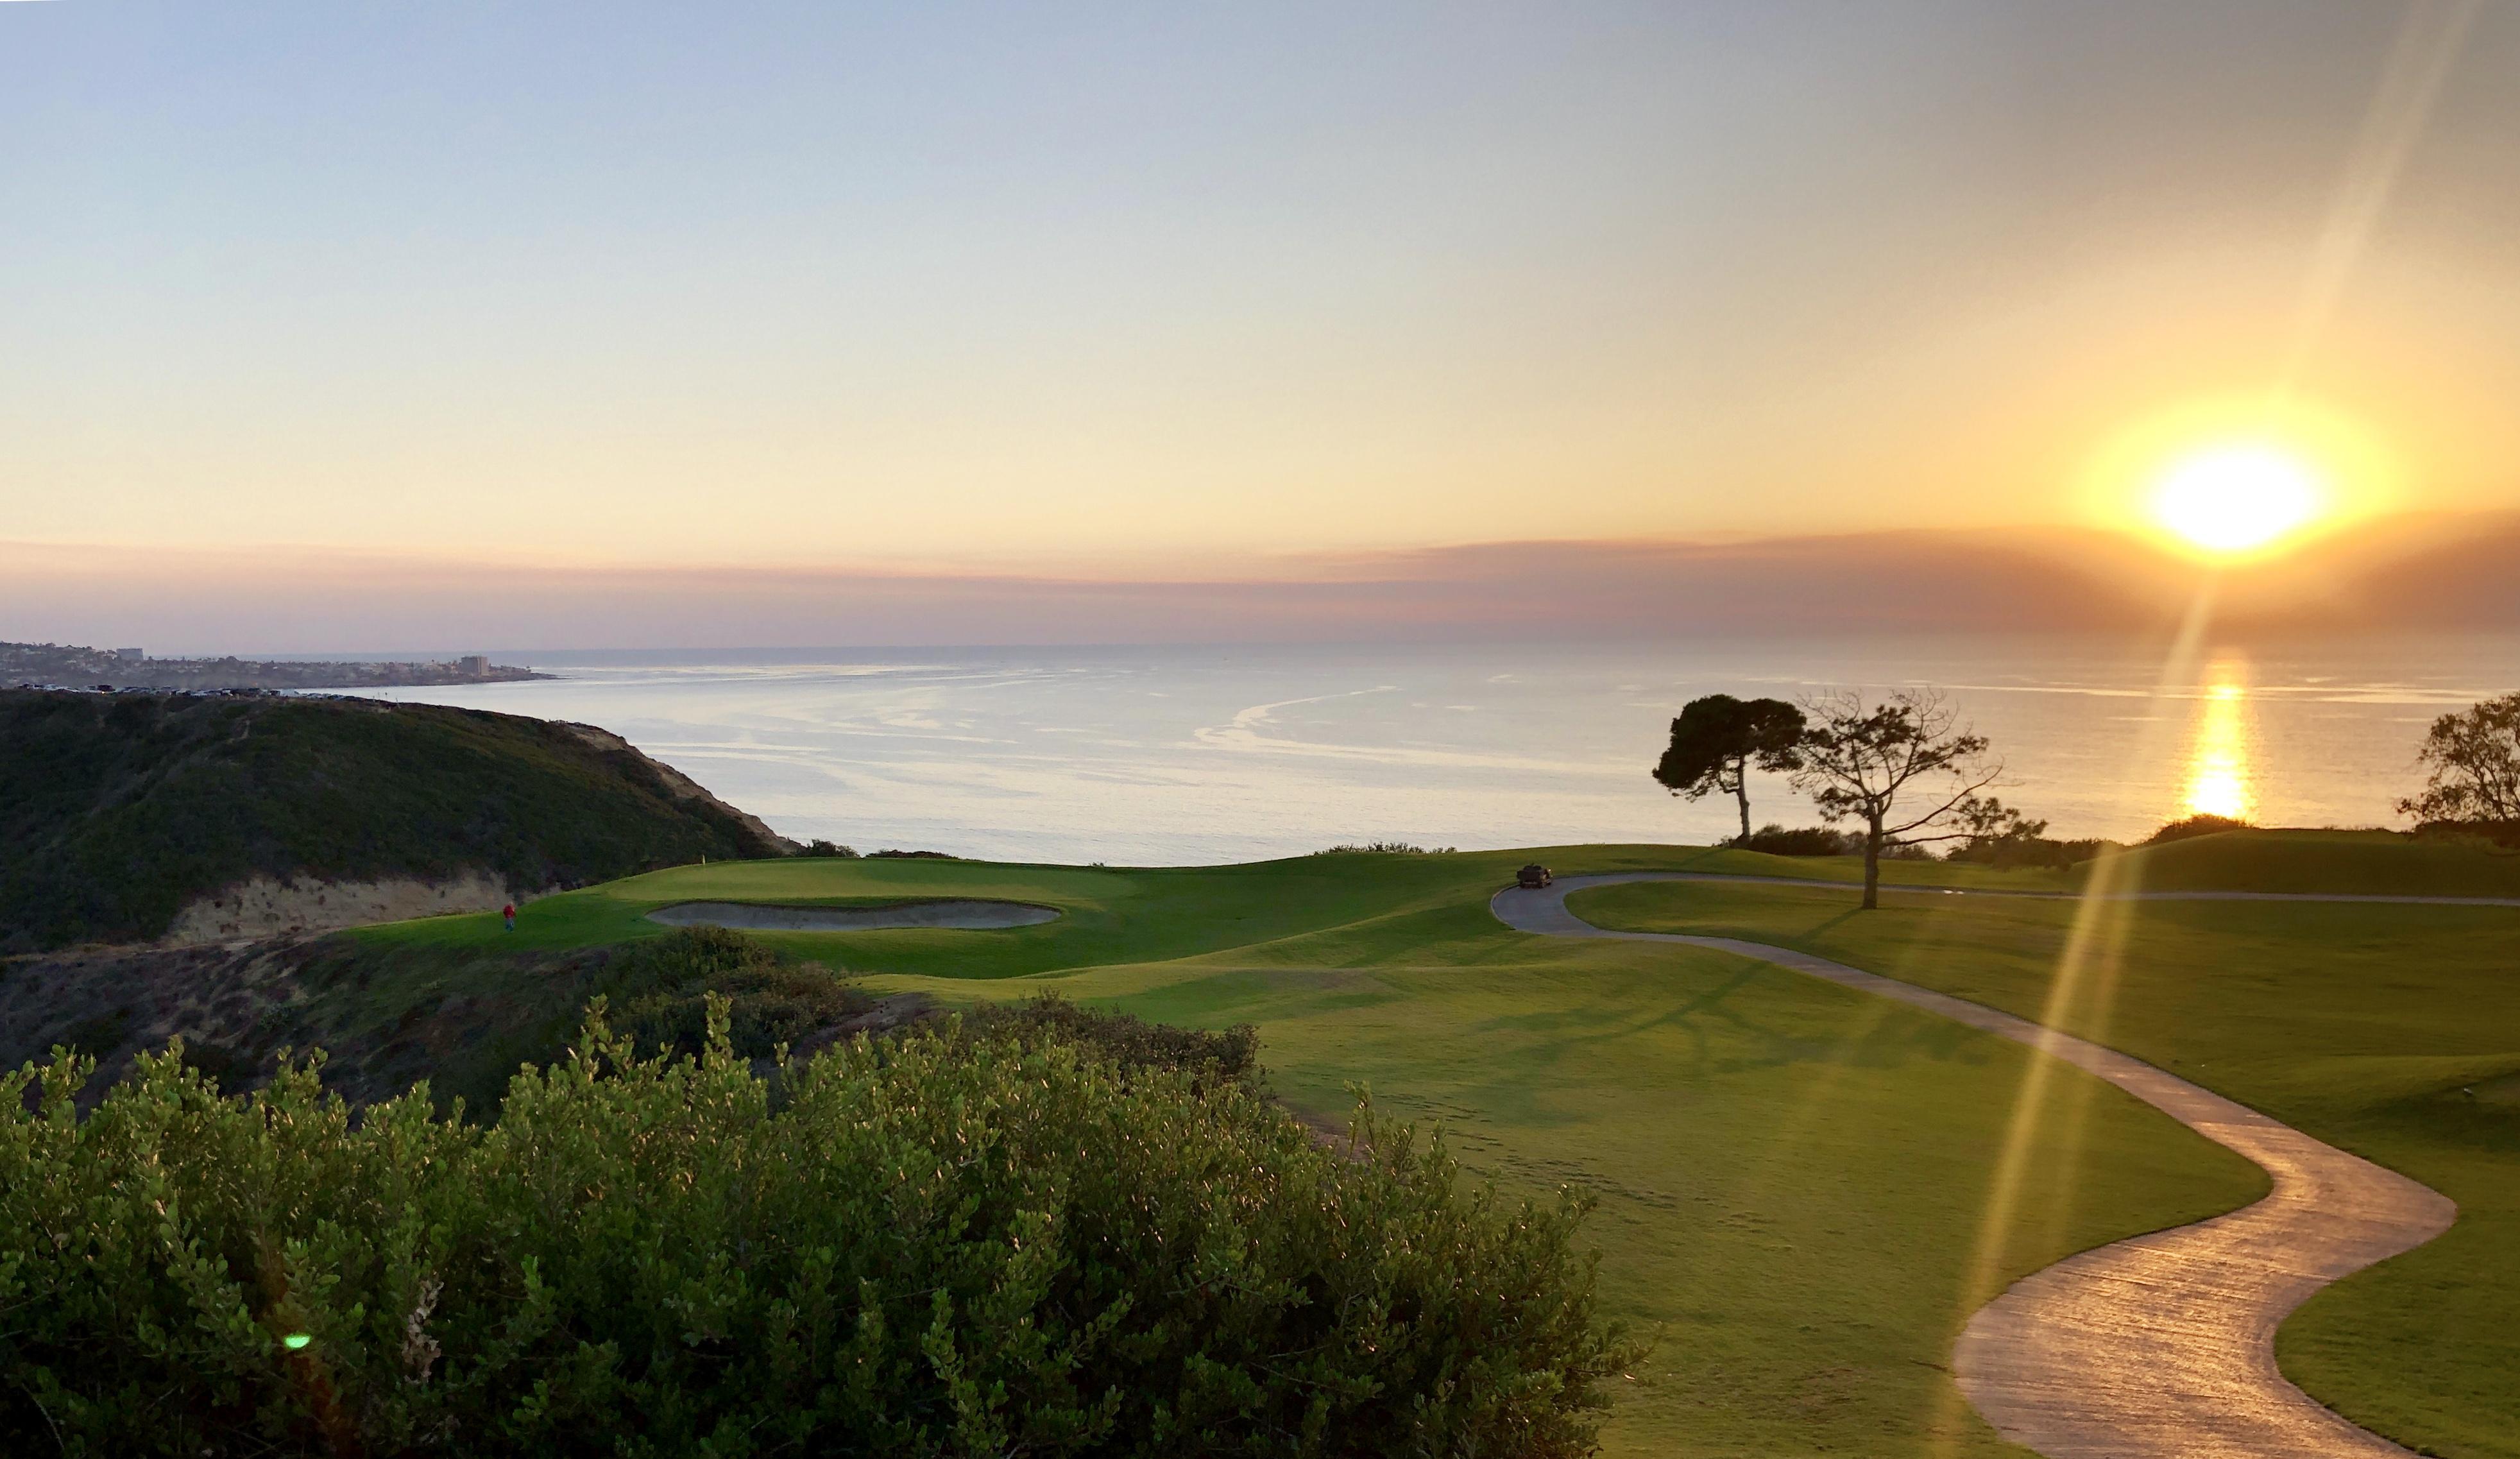 Pro Golf Clinic at Torrey Pines Golf Course with Darktrace and NWTech